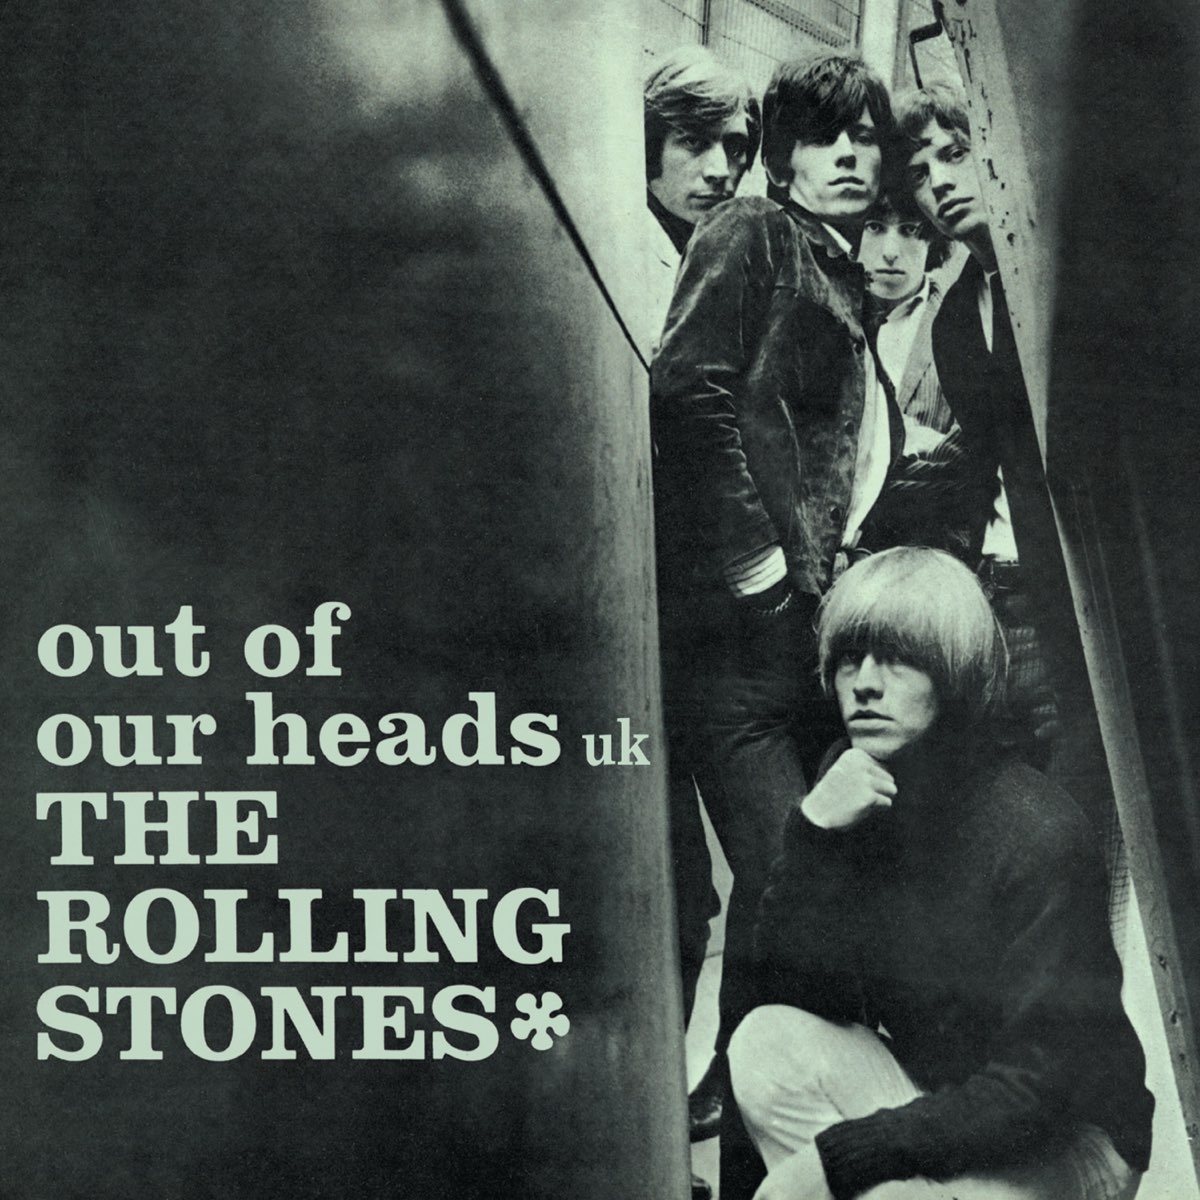 Out of Our Heads (UK) - Album by The Rolling Stones - Apple Music